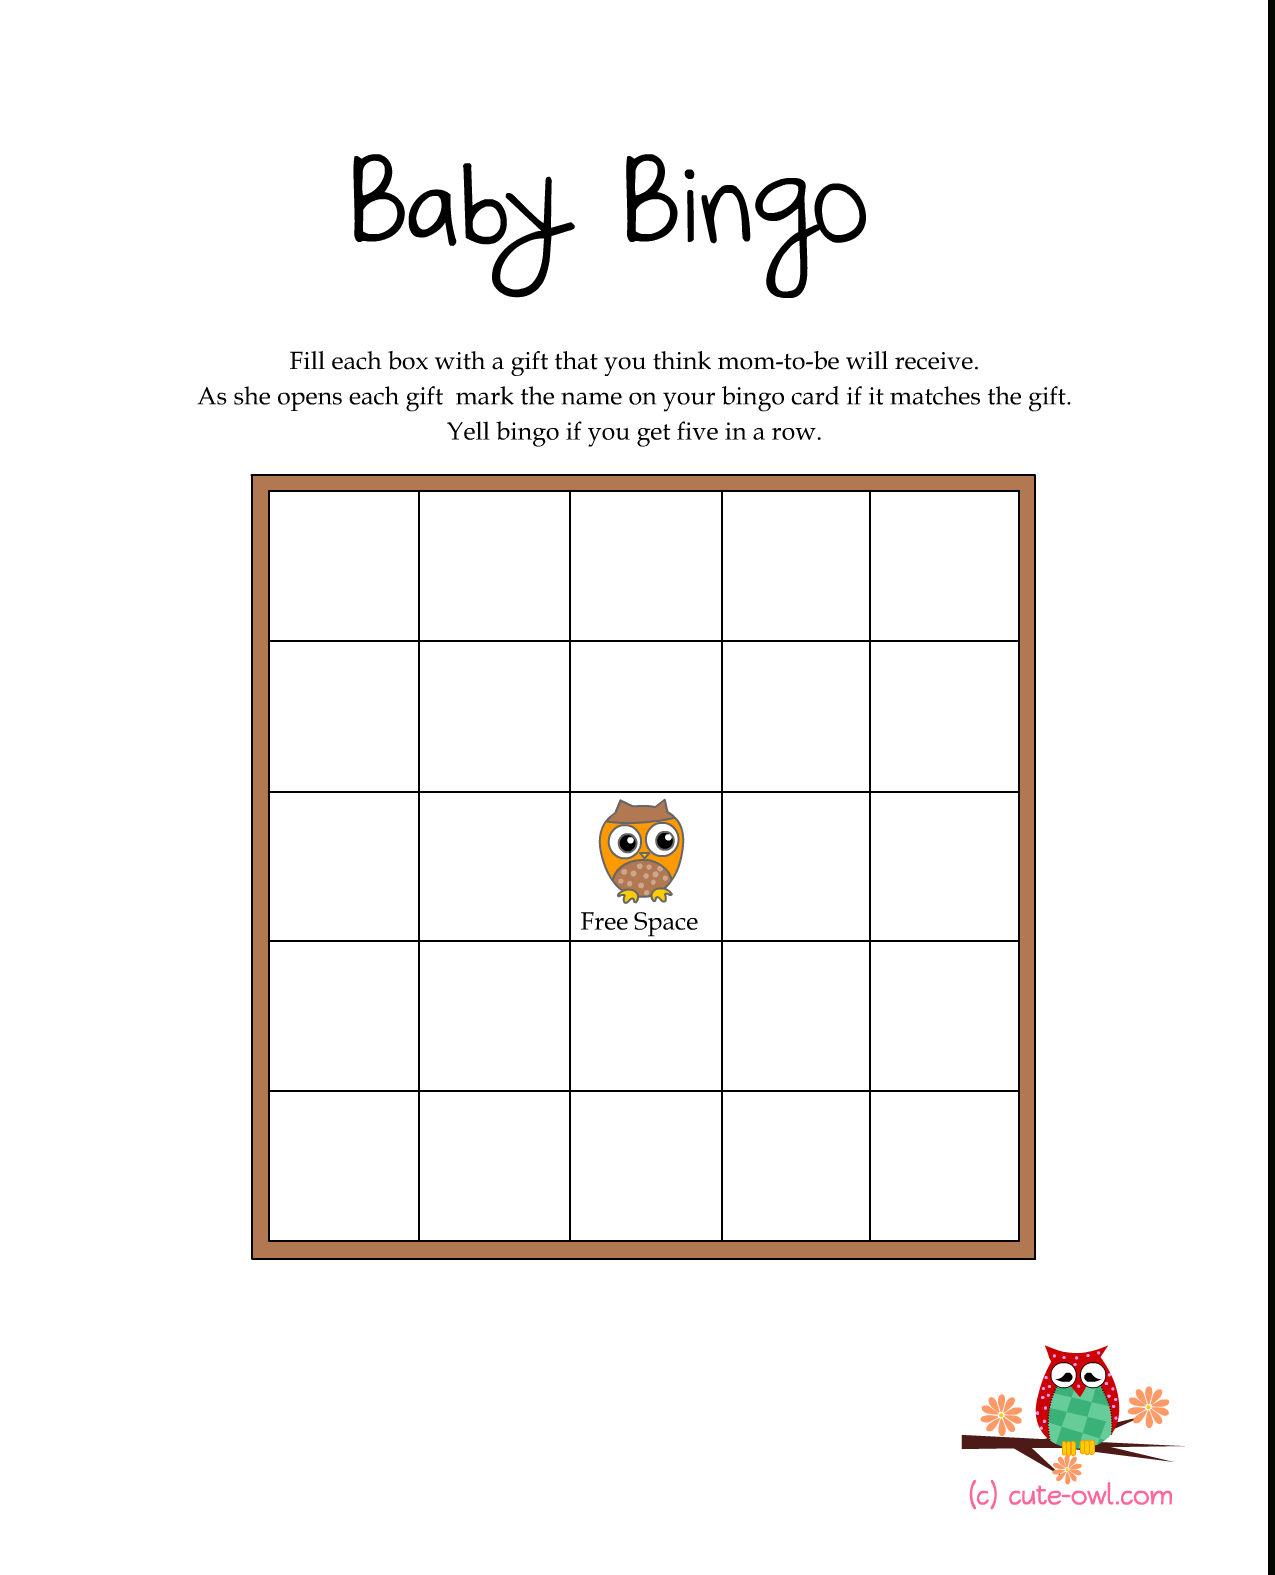 Free Printable Owl Themed Baby Shower Games | Woodland Animal Themed - Baby Bingo Game Free Printable